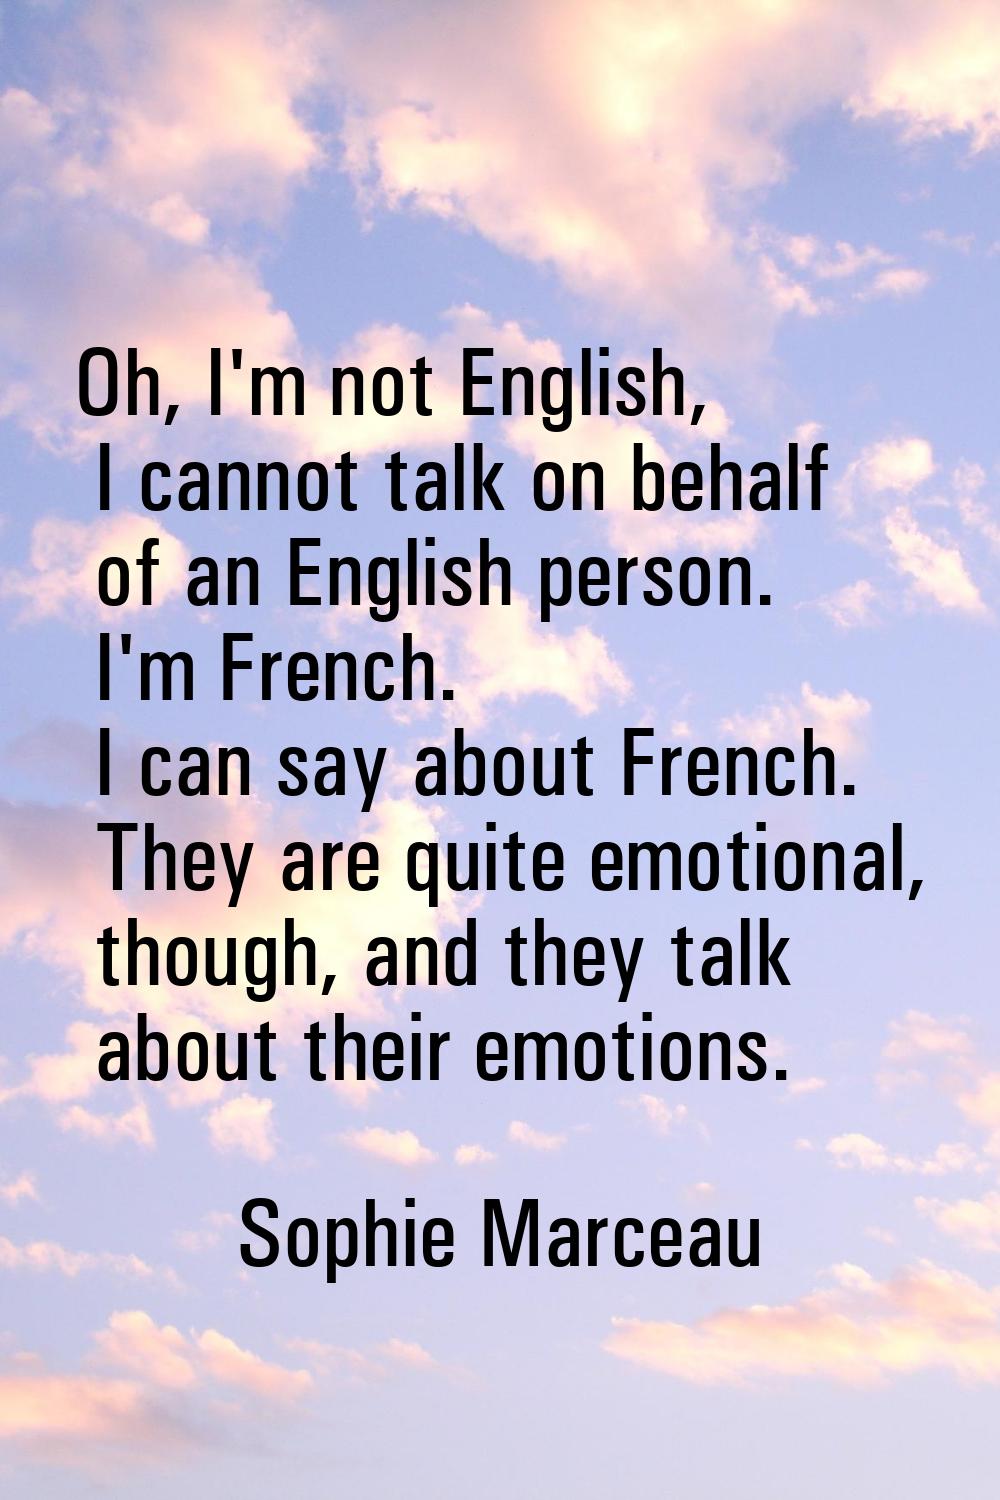 Oh, I'm not English, I cannot talk on behalf of an English person. I'm French. I can say about Fren